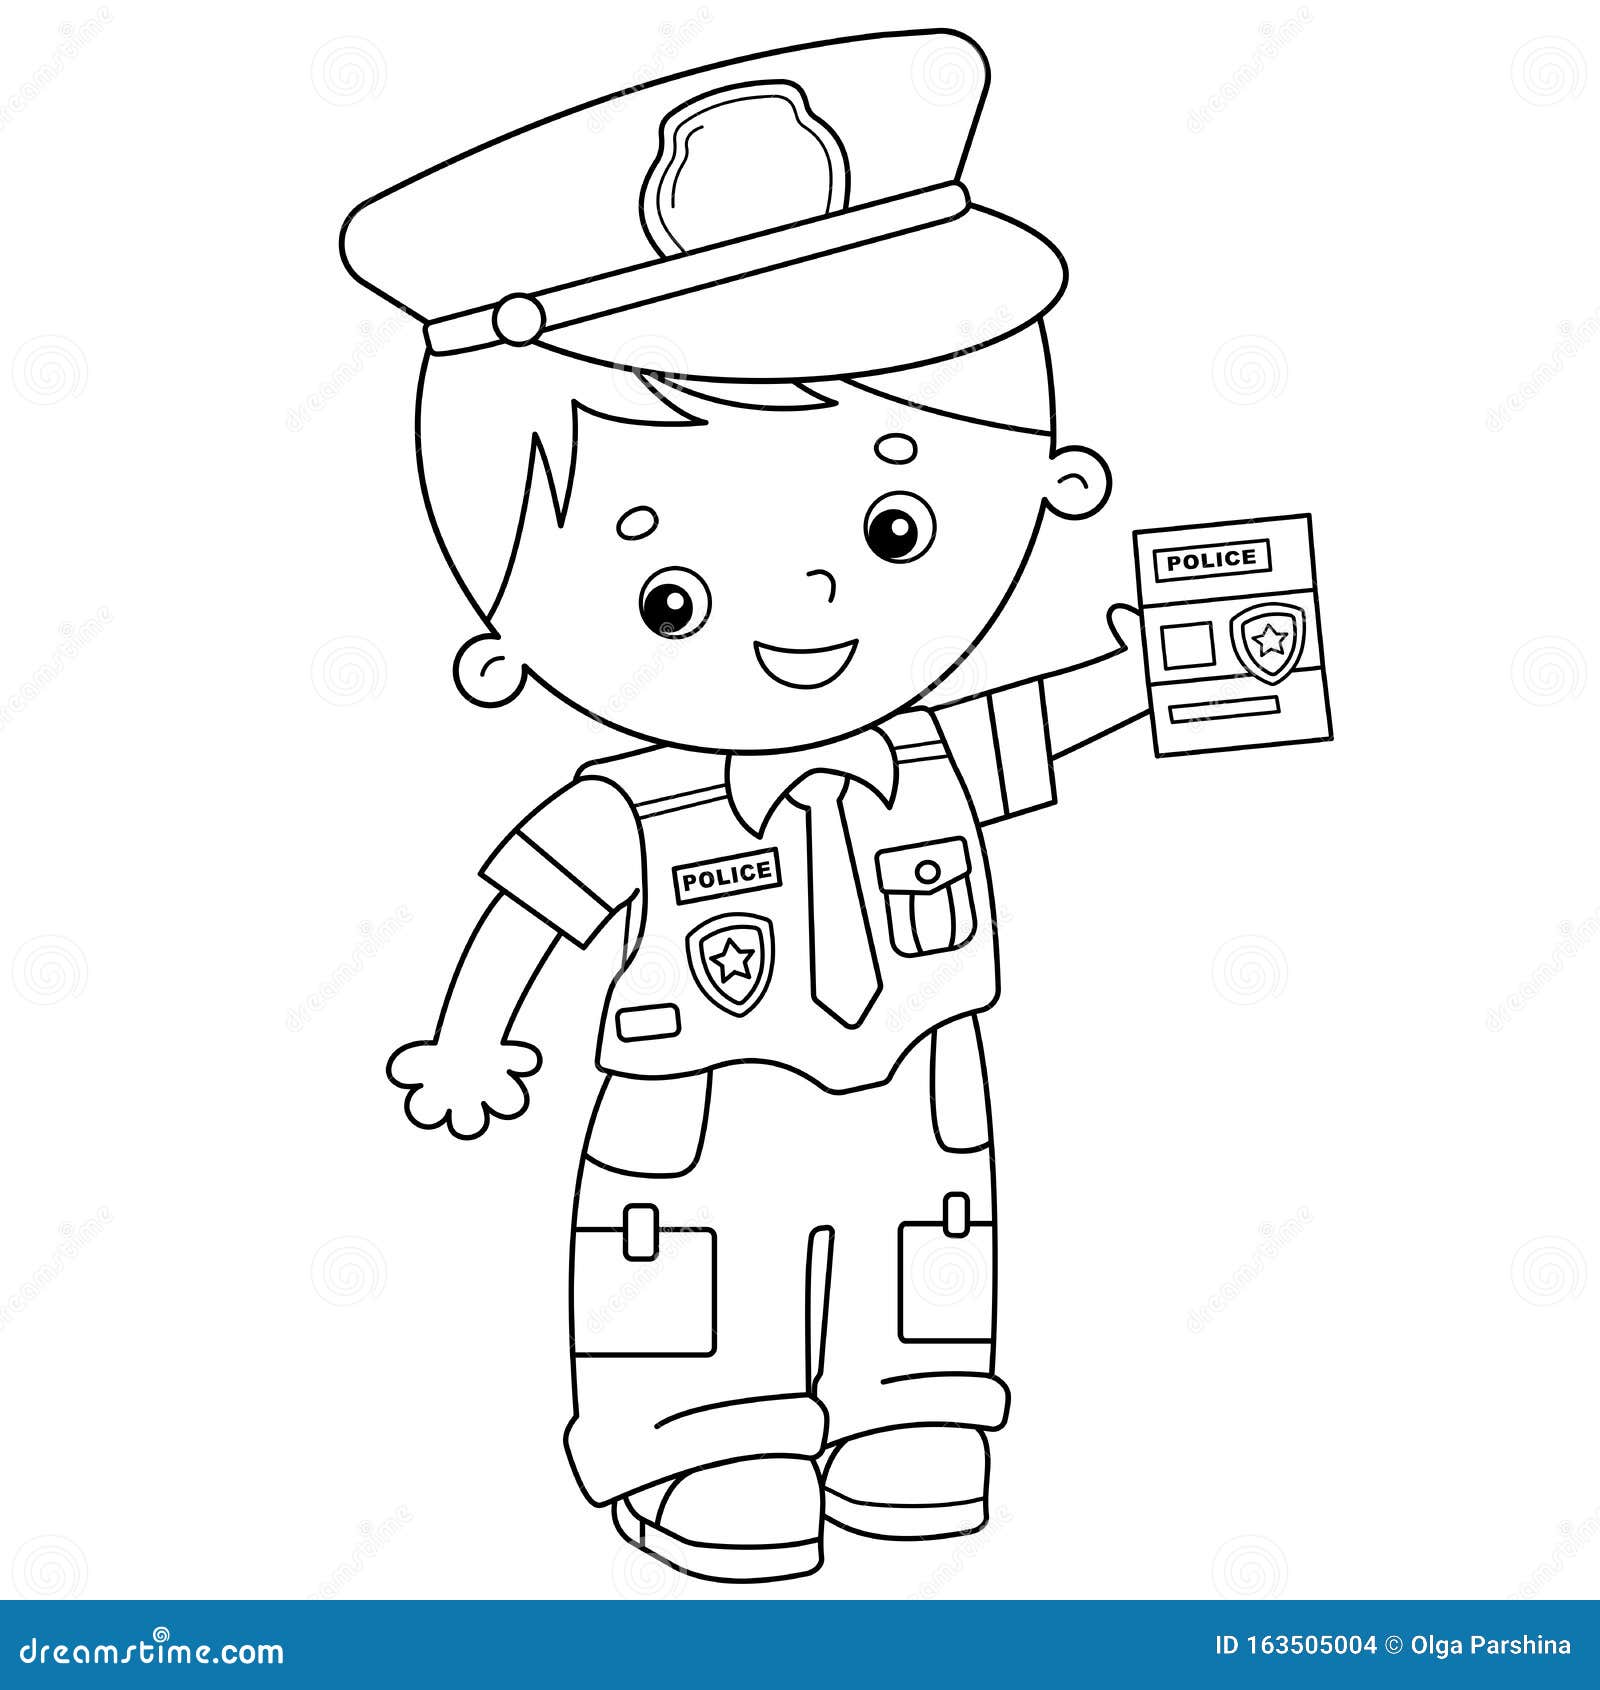 Coloring page outline of cartoon policeman profession